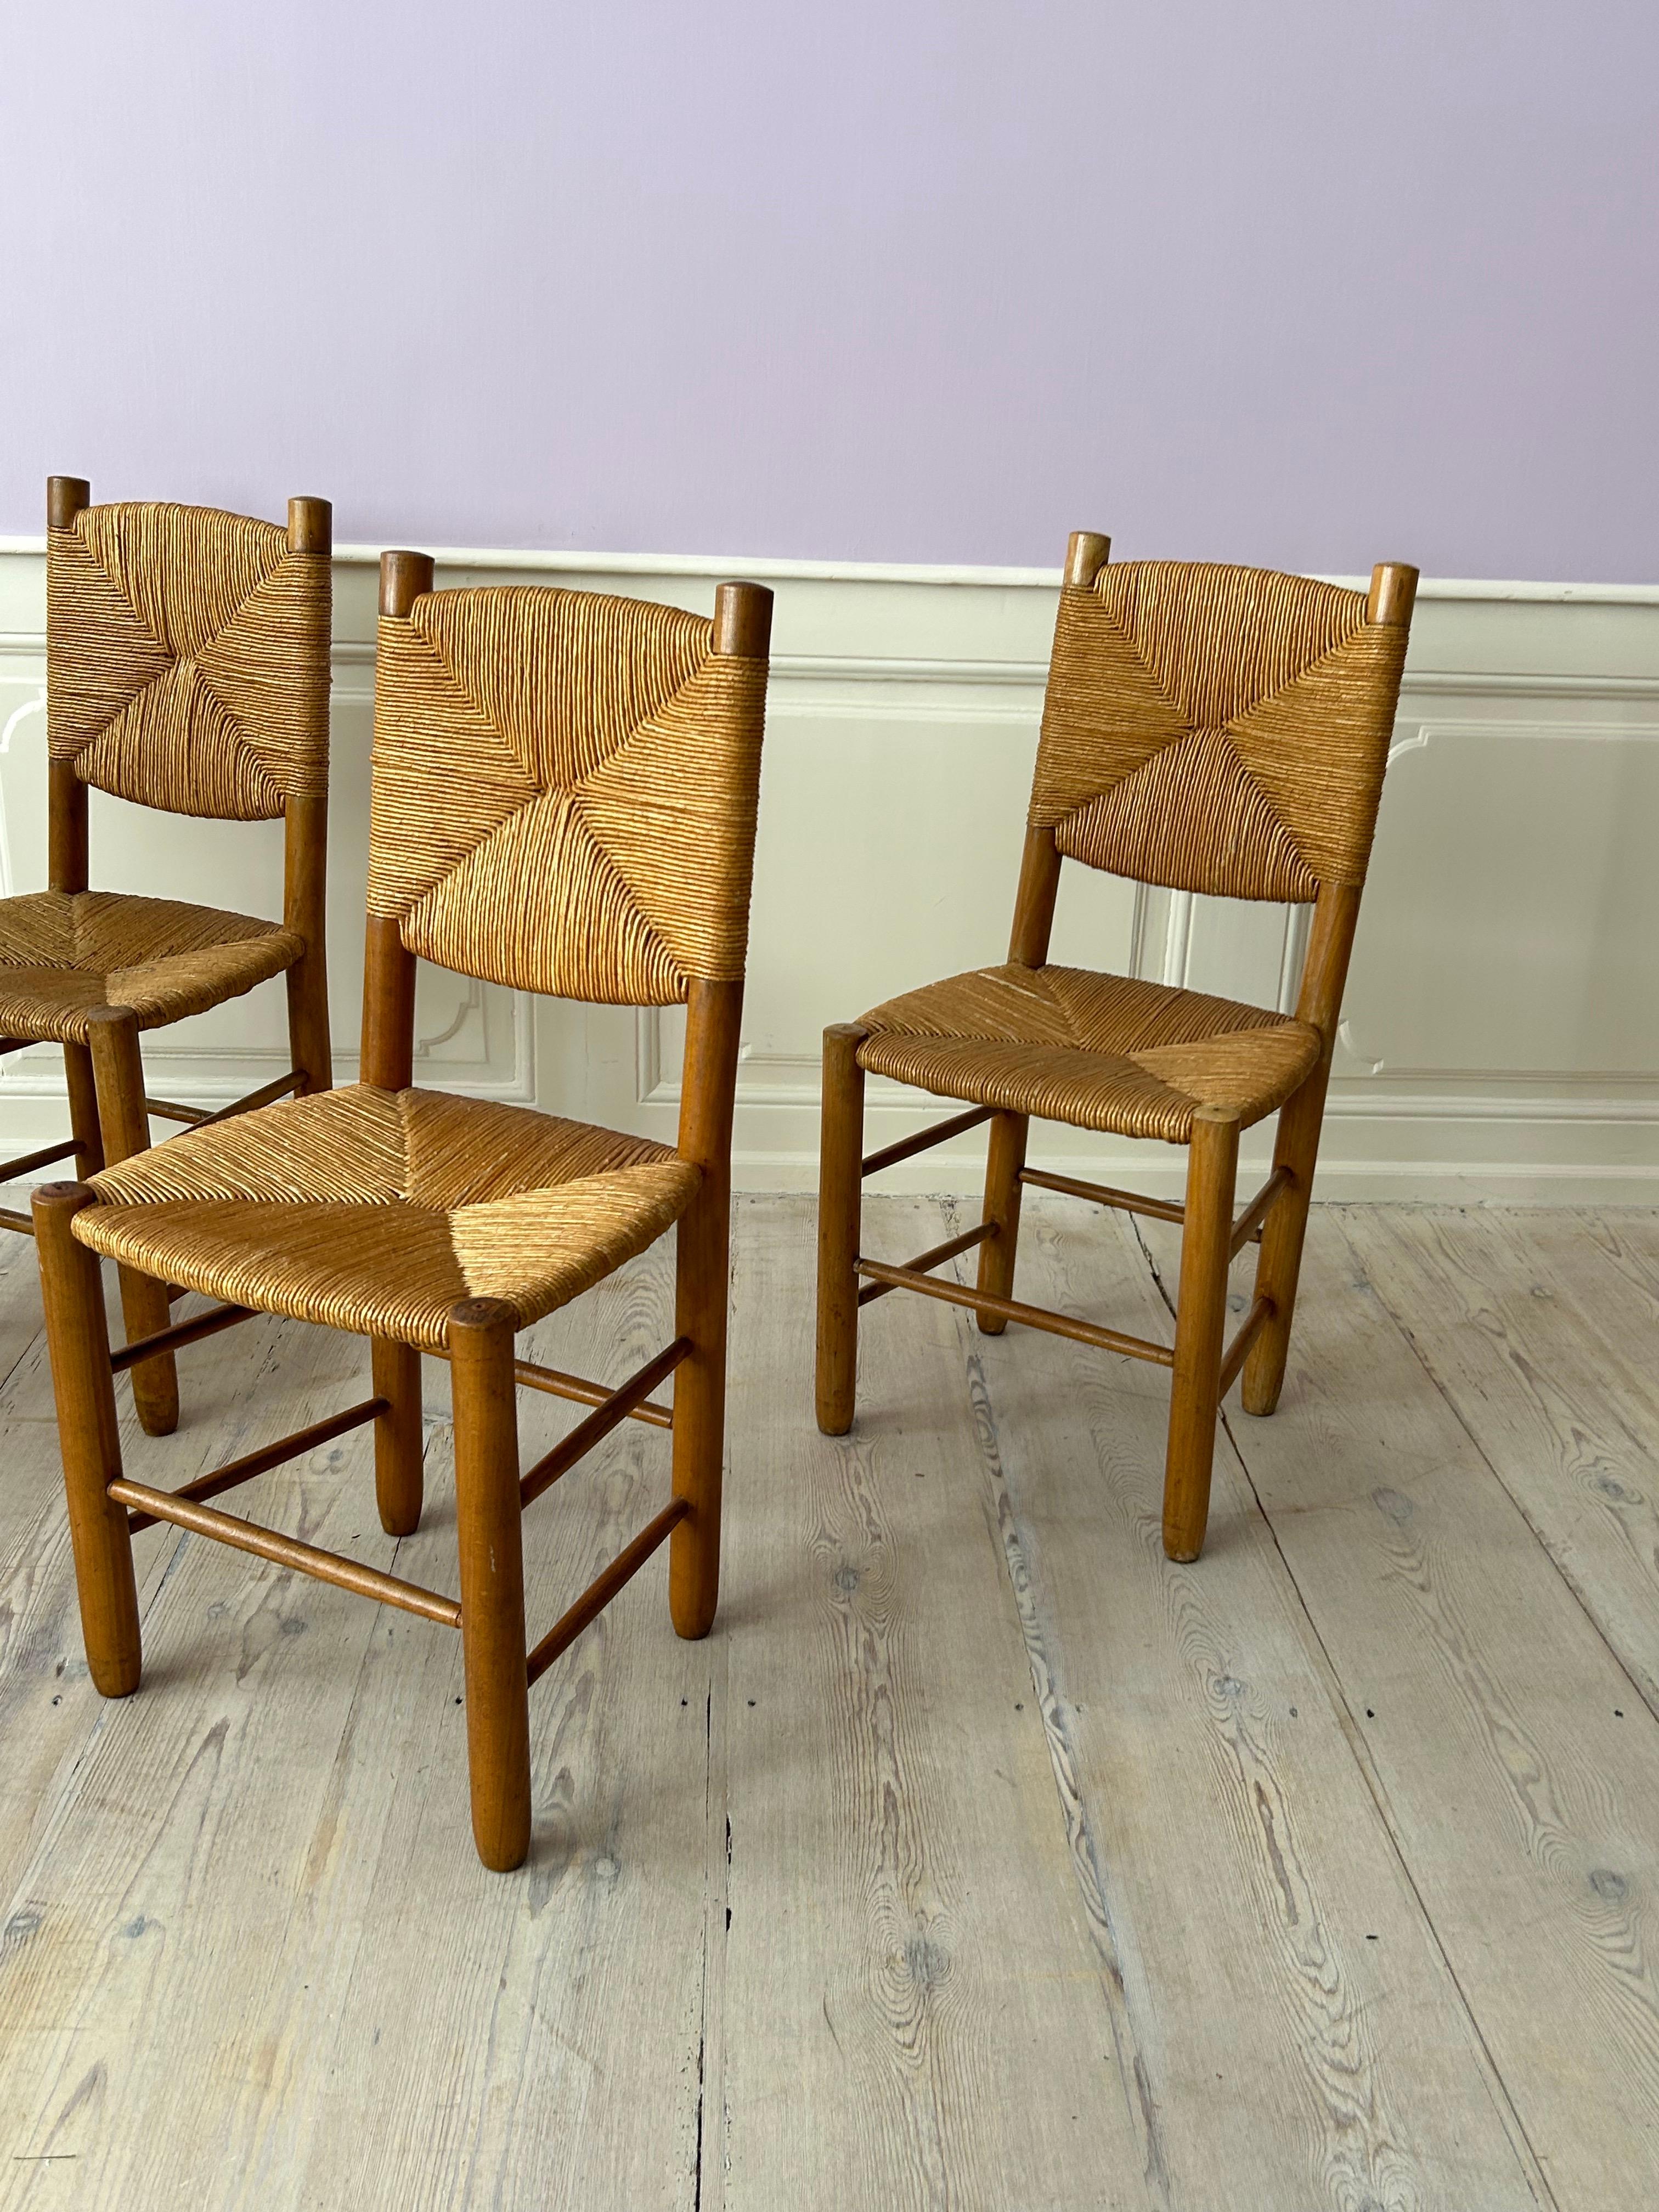 Mid-20th Century Vintage Set of Four Chairs in Ash and Straw, France, 1950s For Sale